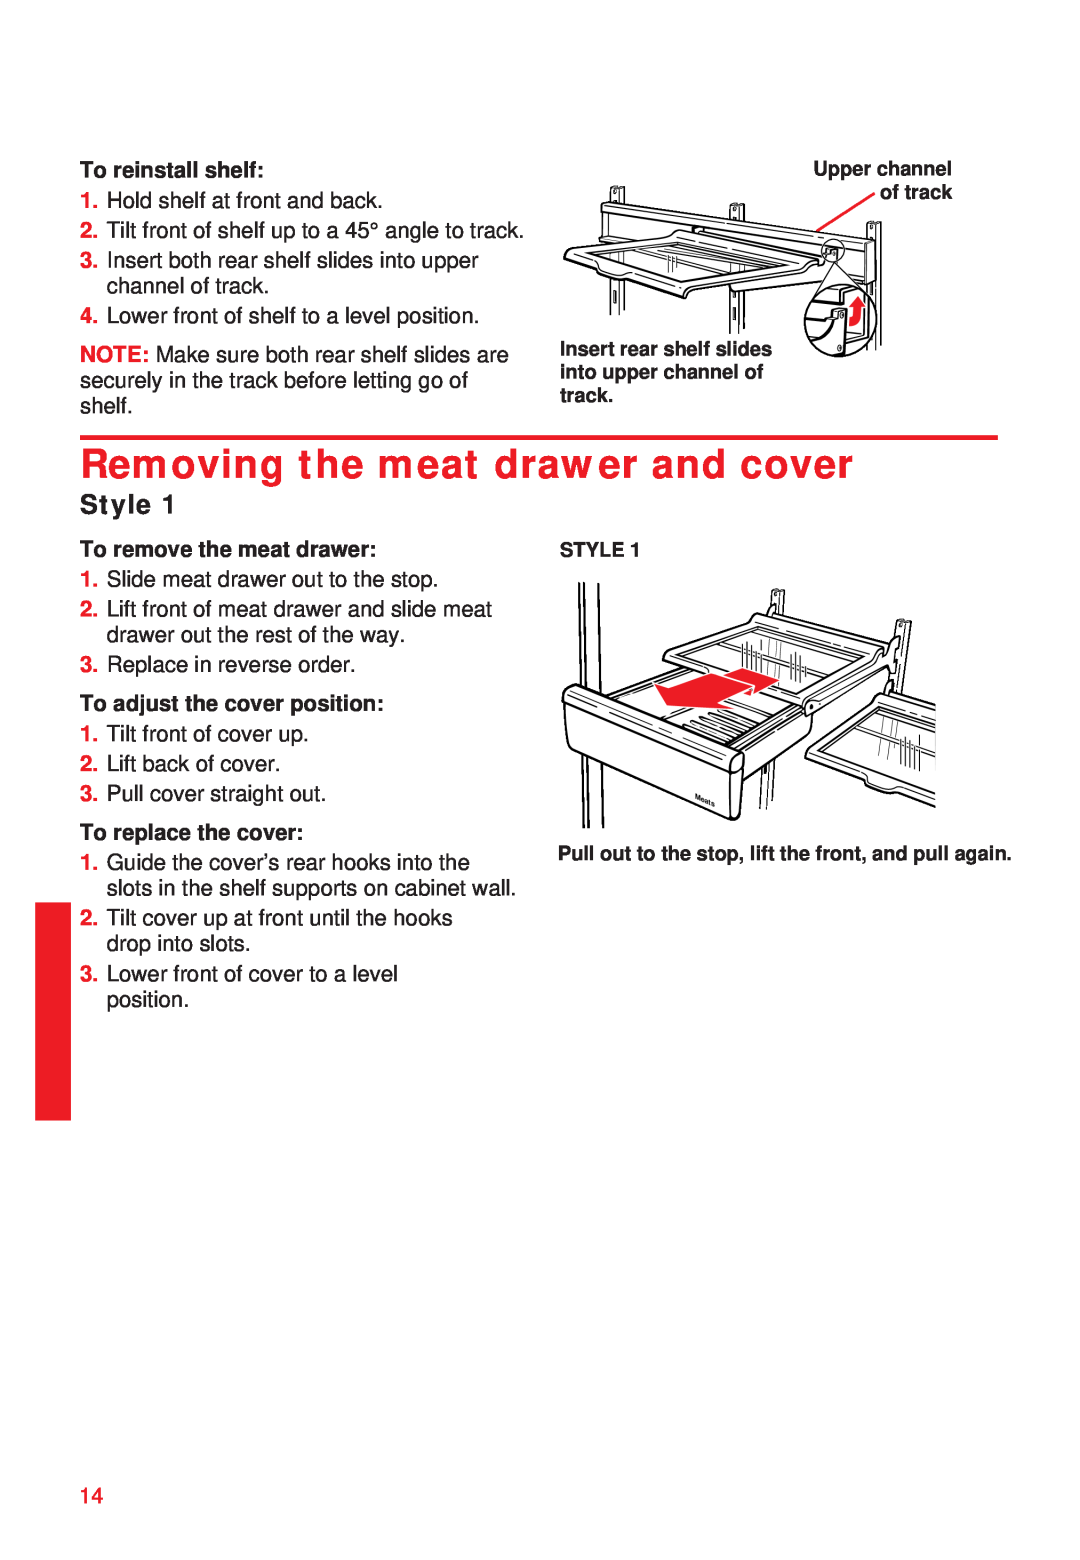 Whirlpool 2195258 manual Removing the meat drawer and cover, Style, To reinstall shelf, To remove the meat drawer 